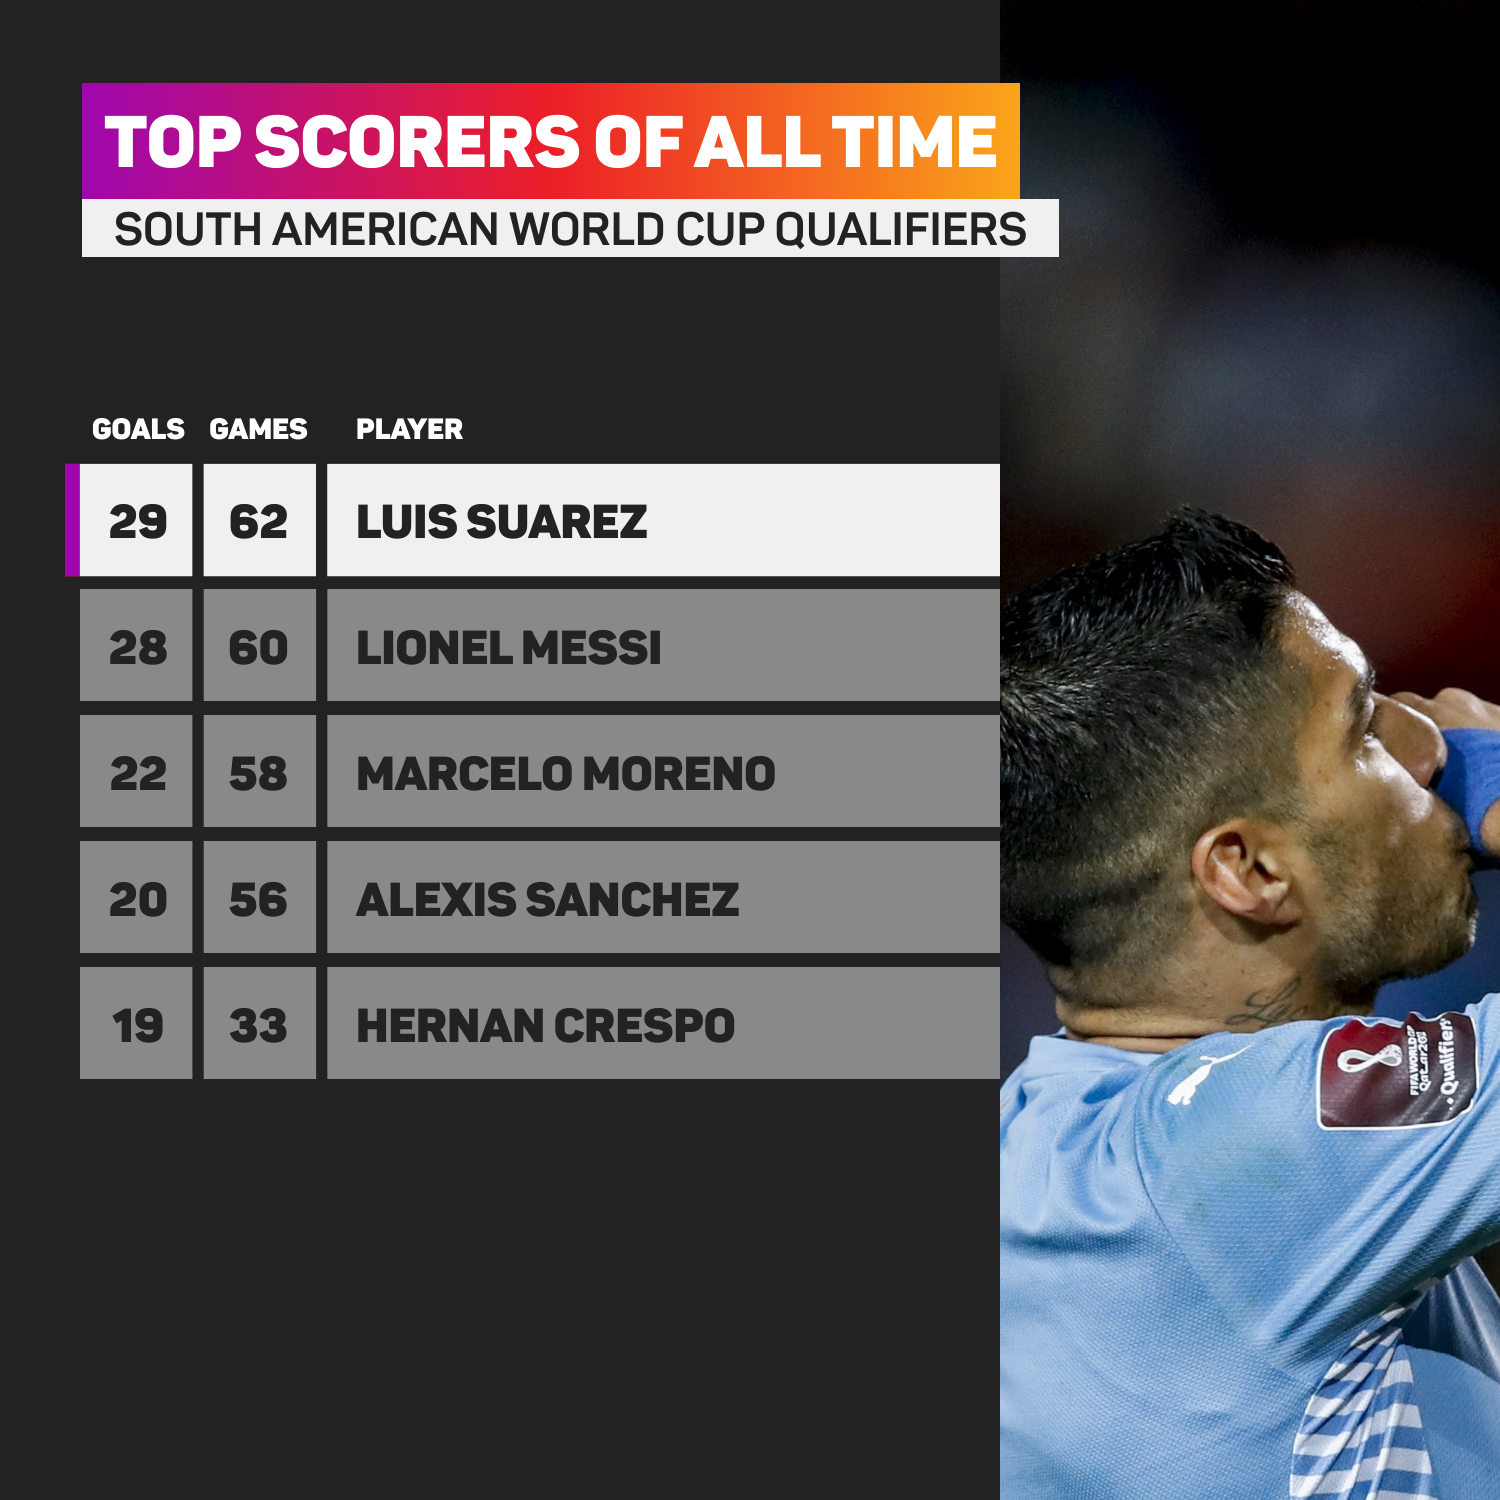 Luis Suarez leads the way for goals scored in South American World Cup qualifiers